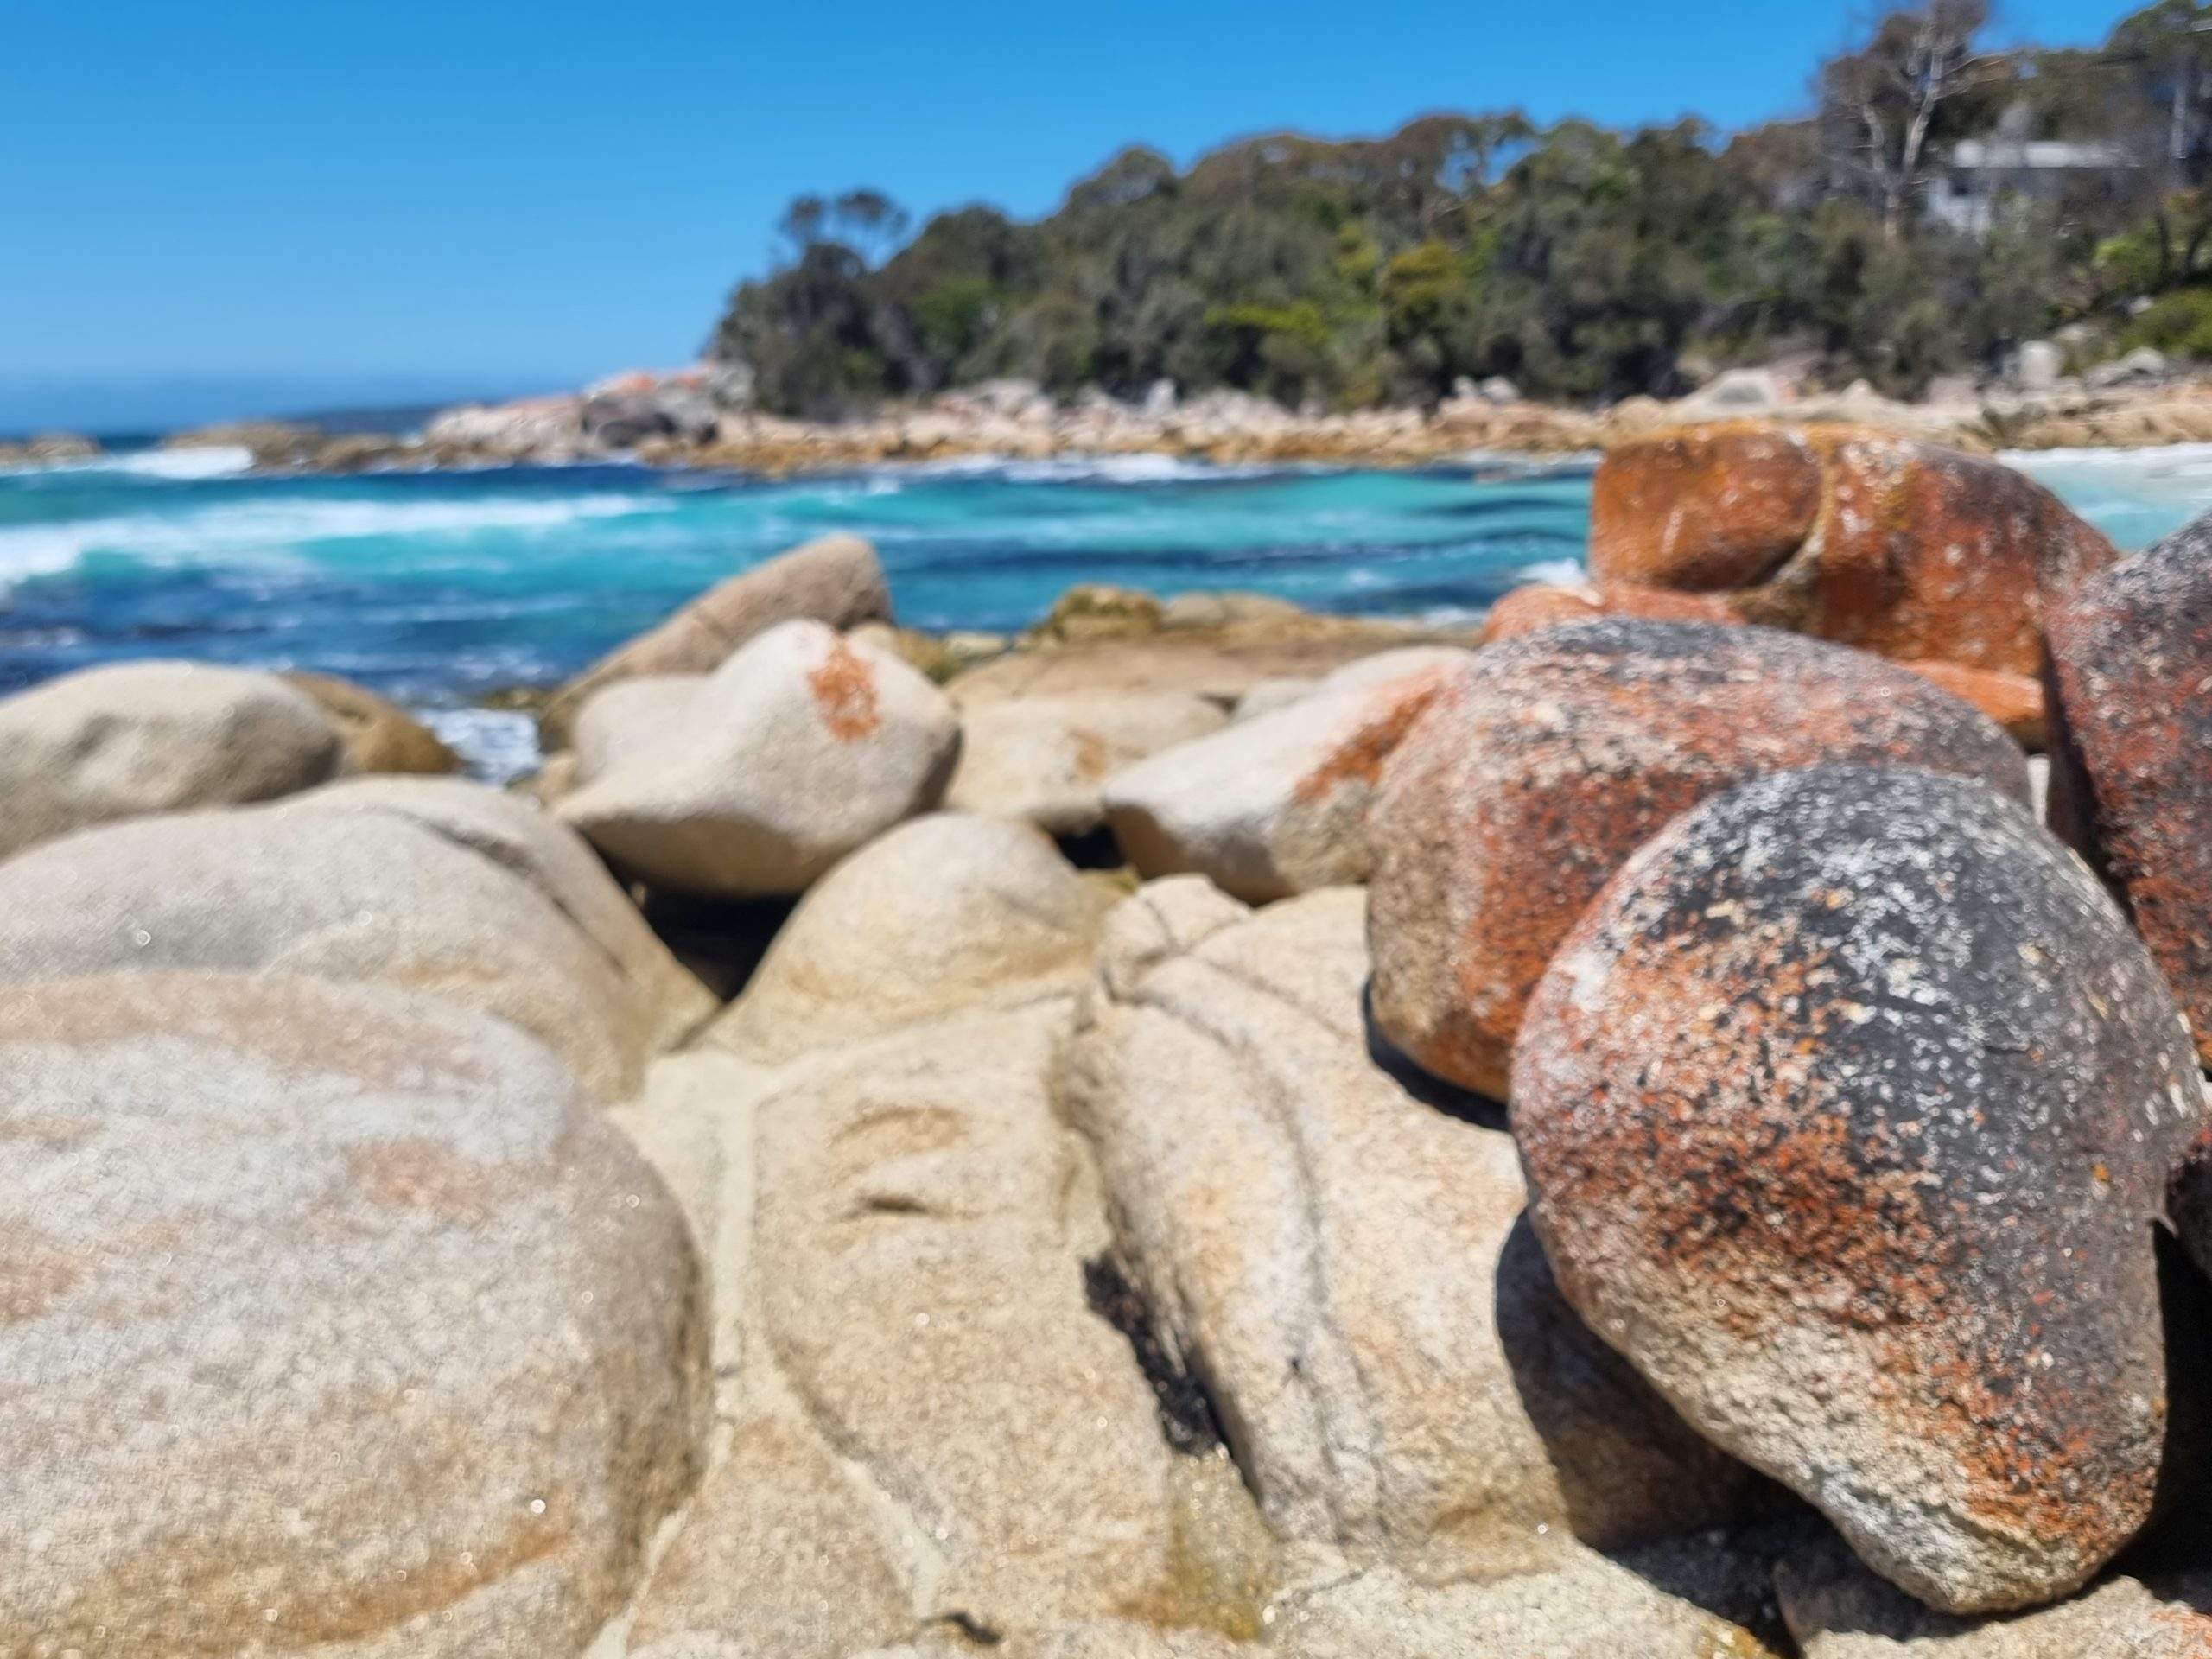 Trip to the Bay of Fires in Tasmania